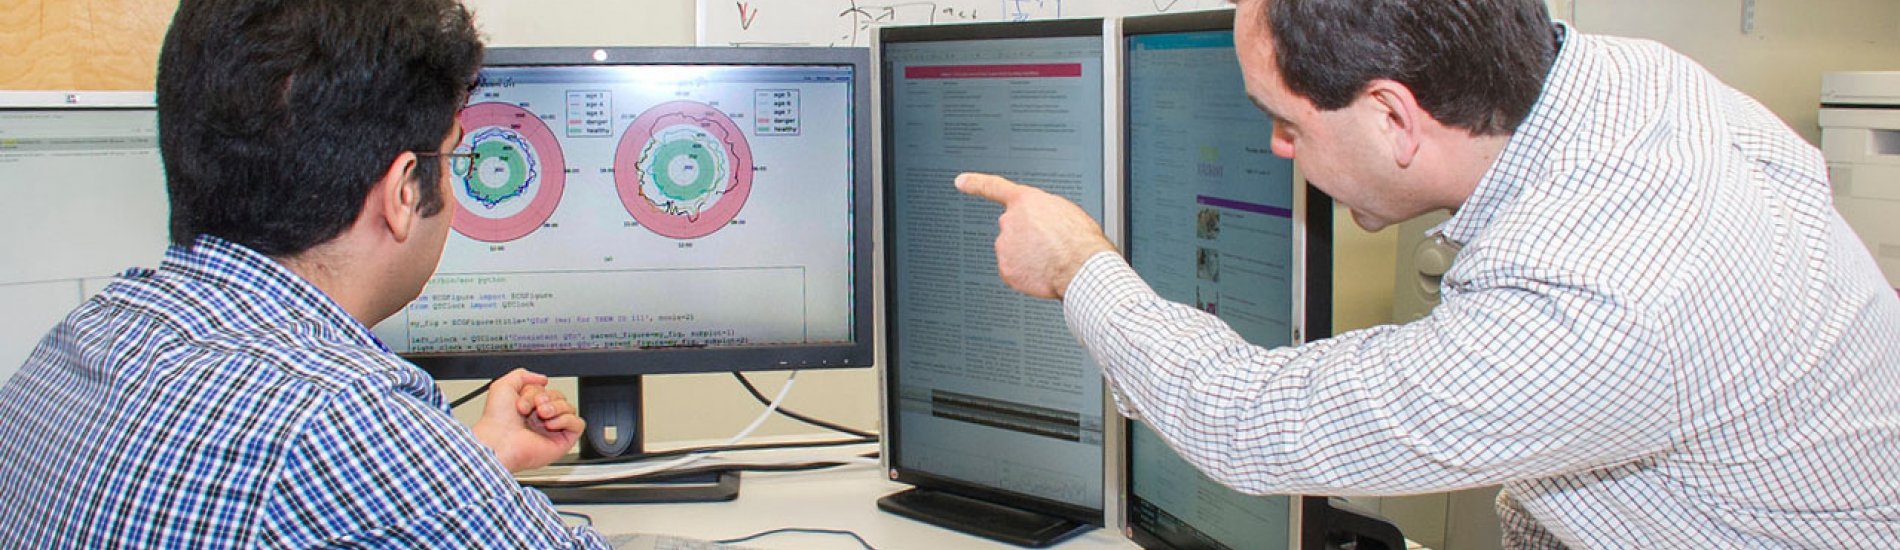 Two UAlbany researchers reviewing data on multiple computer screens.